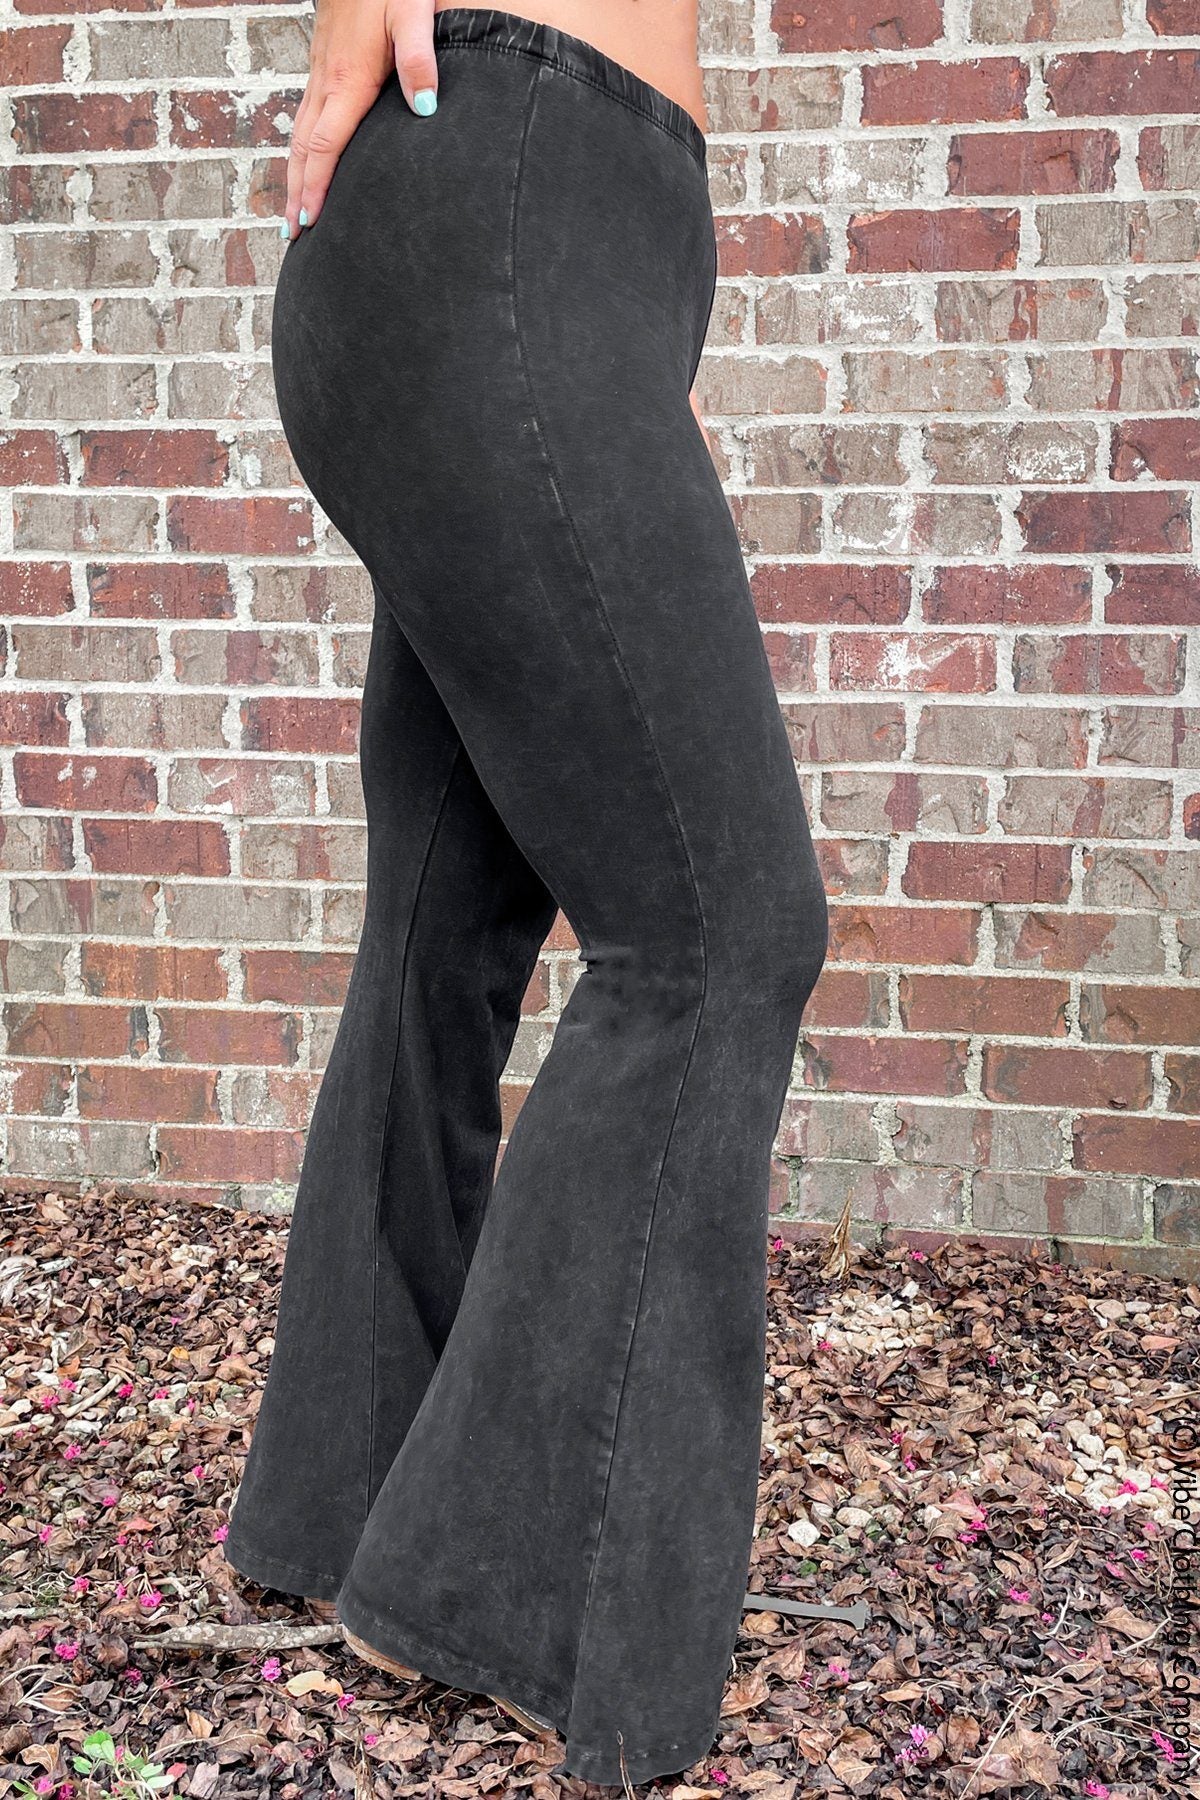 Black Flare Pants, All American Flares